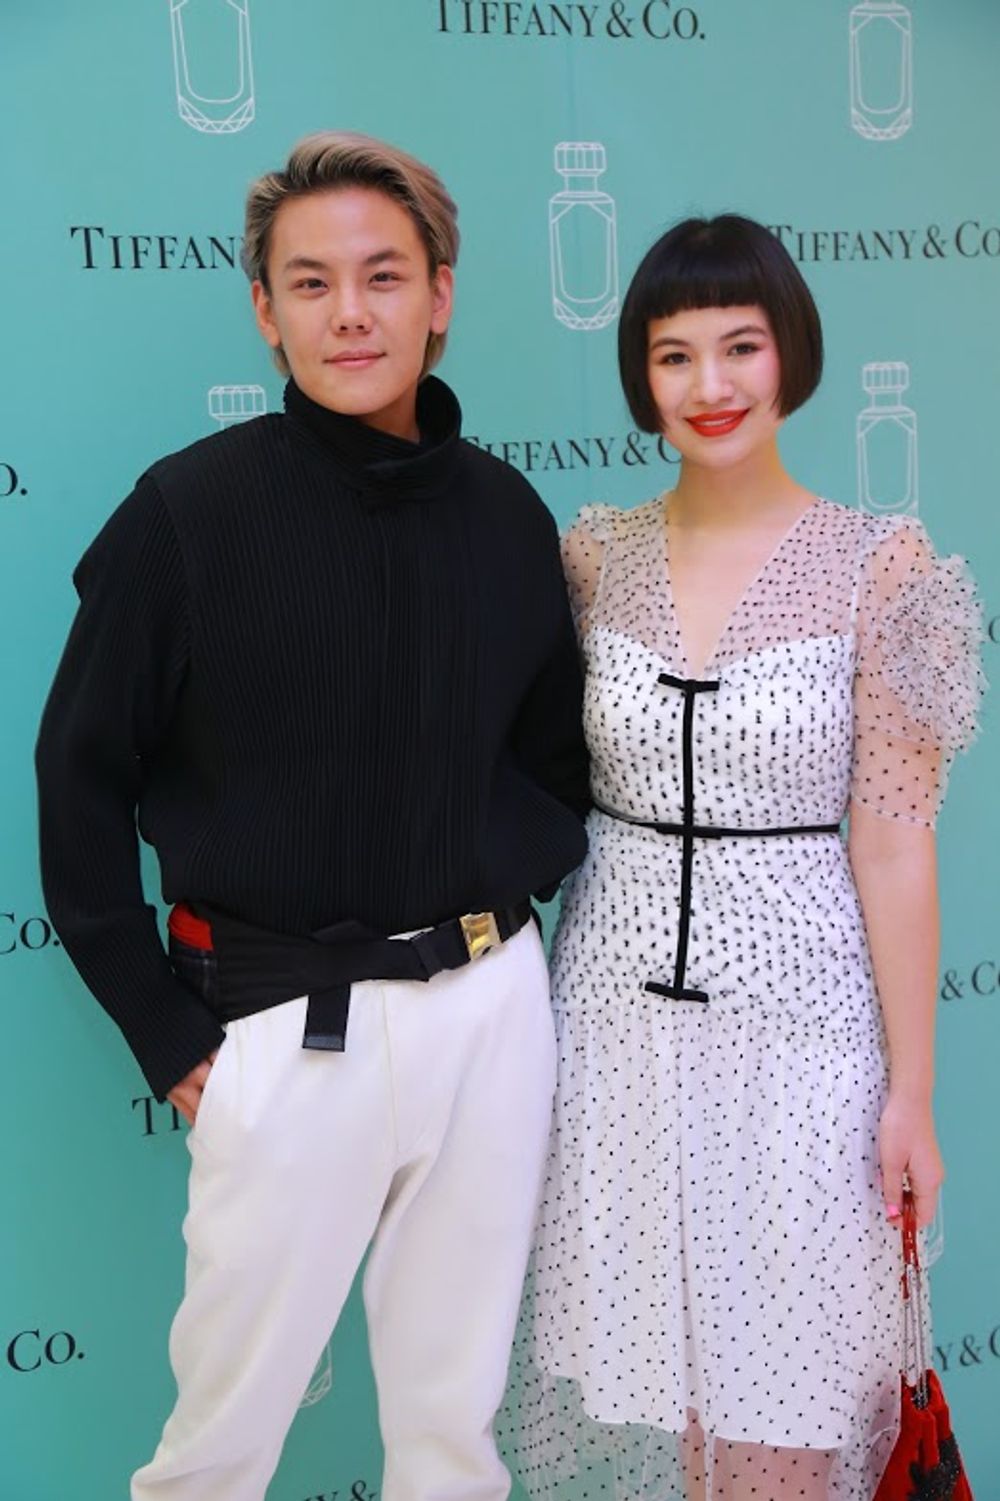 Tiffany & Co.'s new fragrance launch party | Lifestyle Asia Bangkok